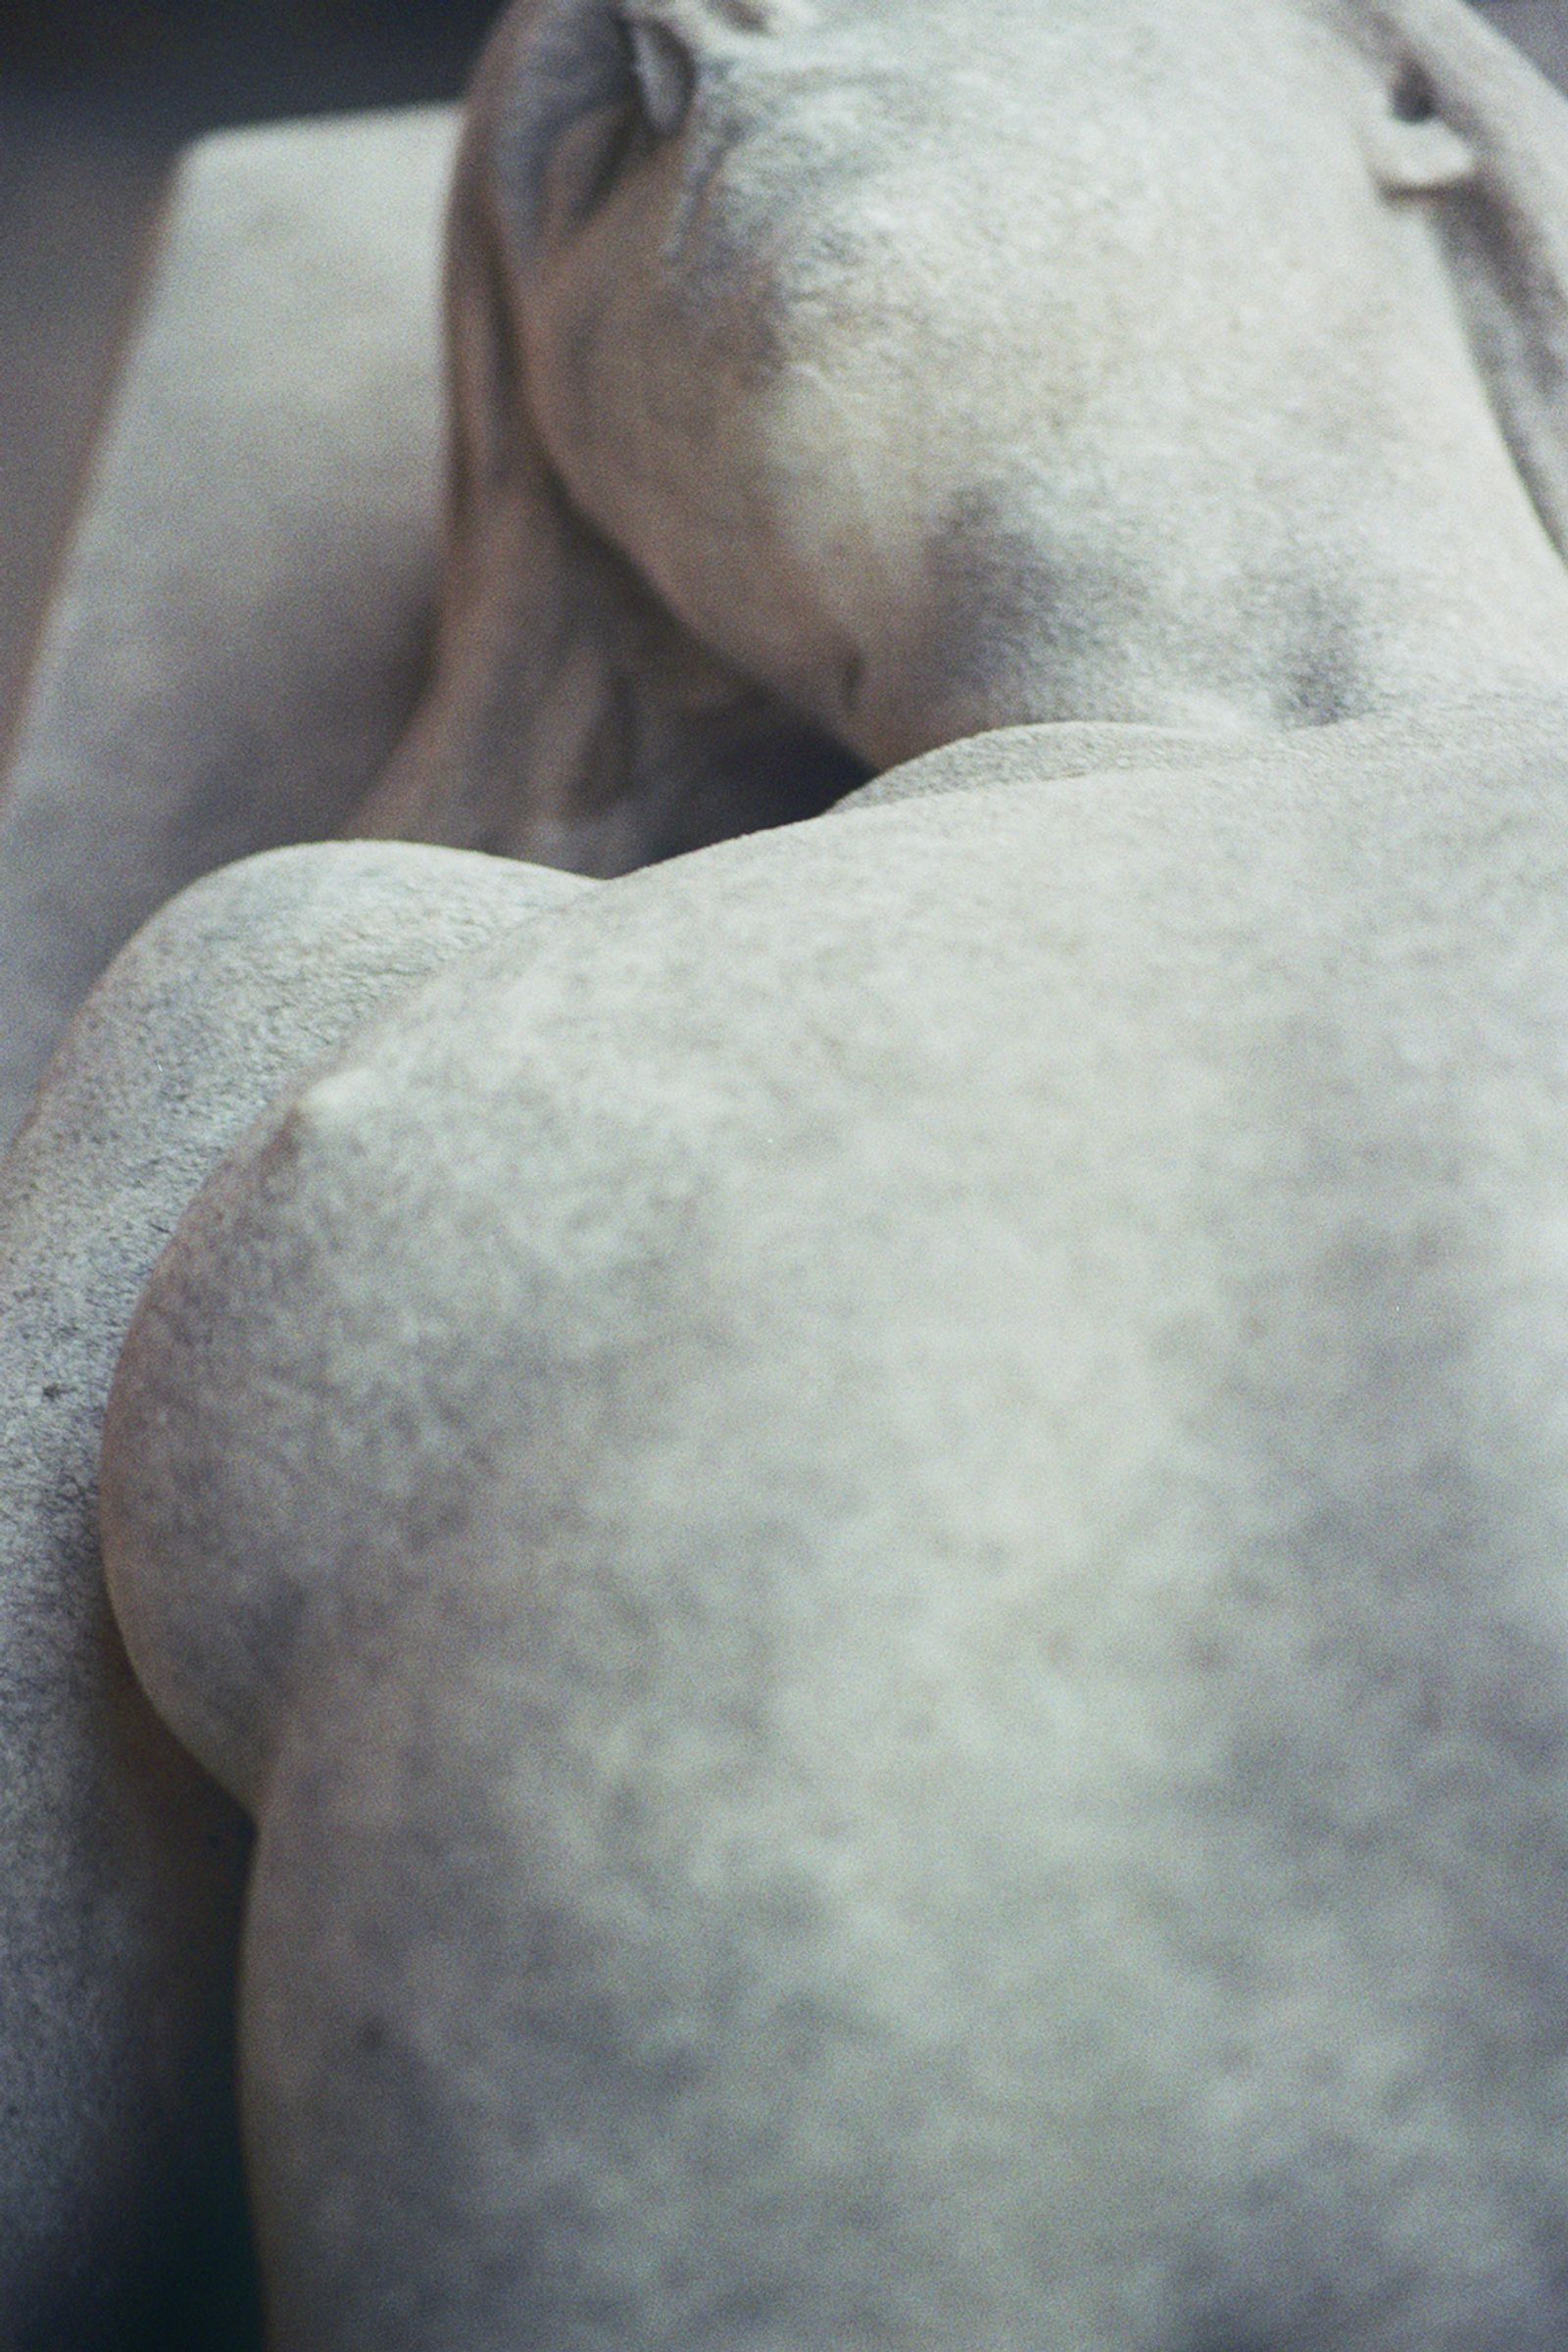 © Marta Marinotti - Image from the Monumentale photography project